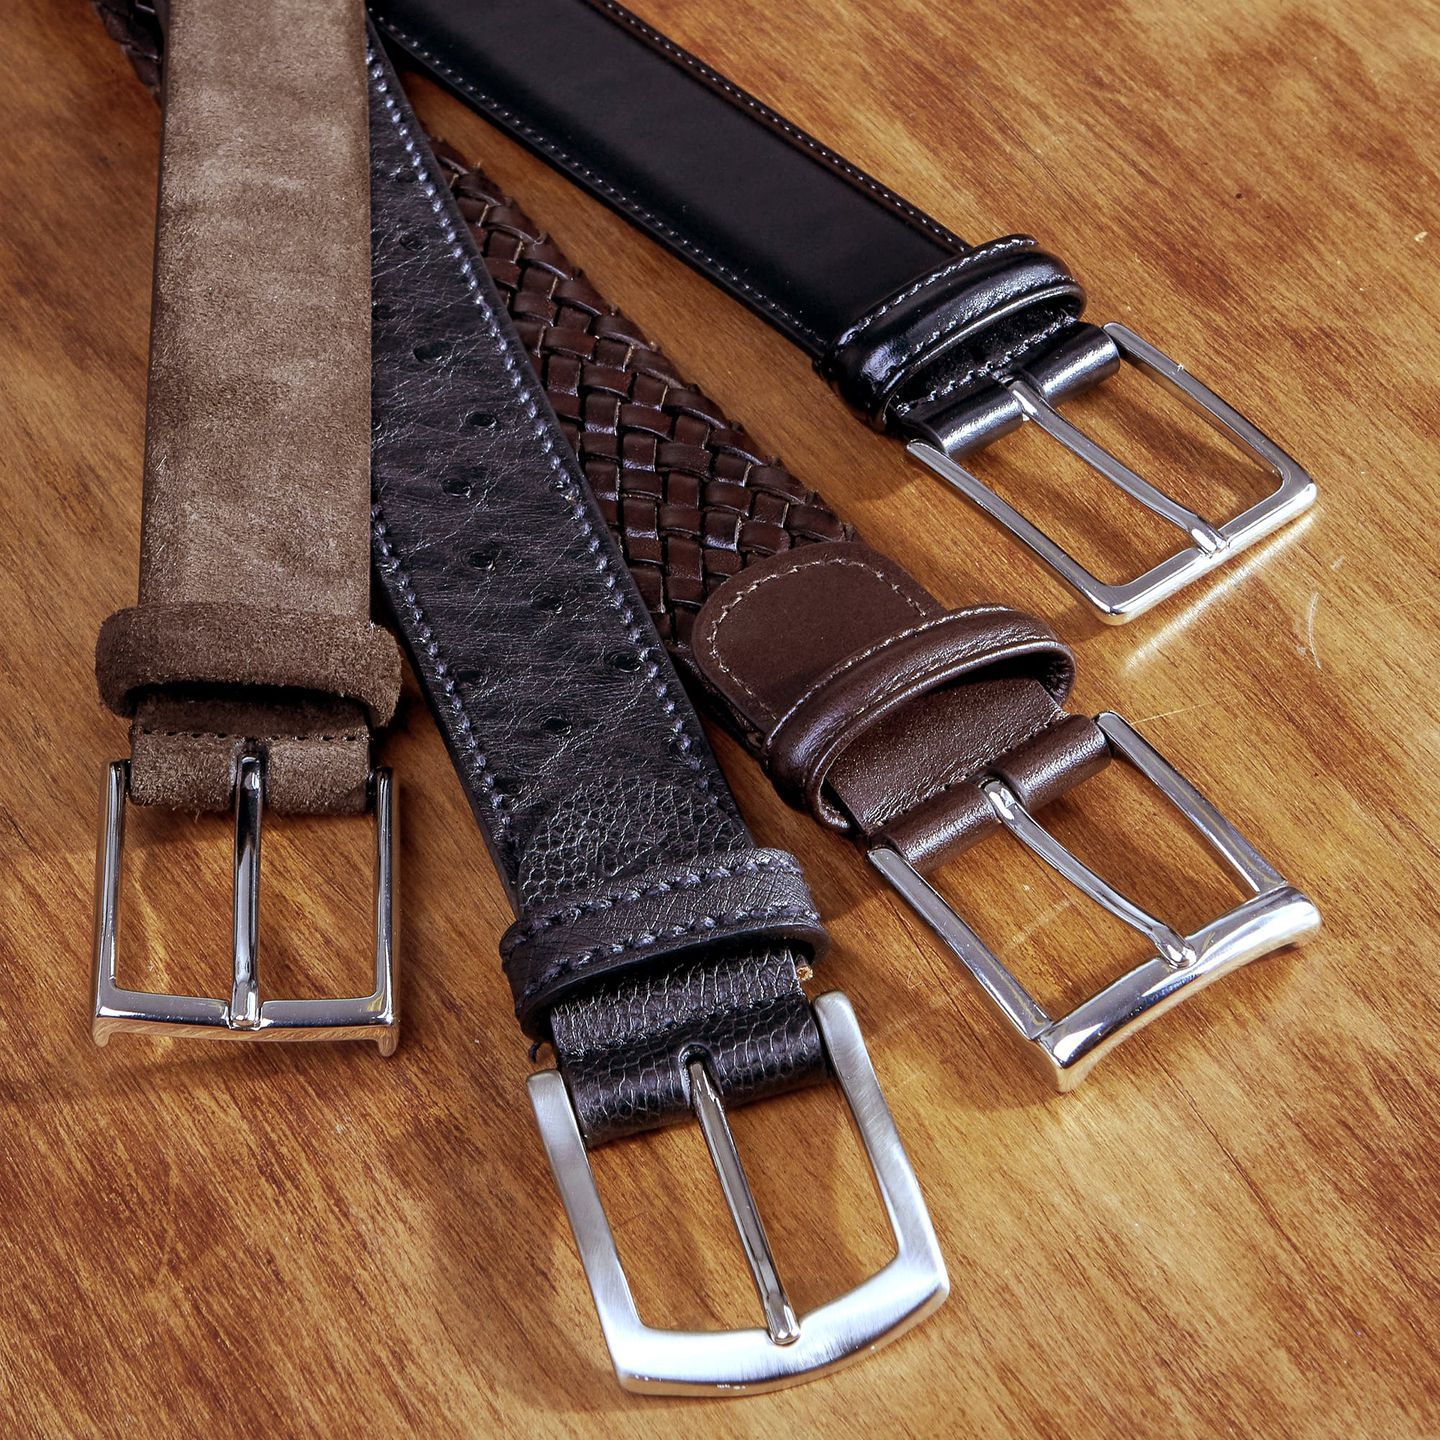 Guide Essential Belts. A picture of three woven leather belts from Andersons: one braided brown belt, one black plain leather belt and one suede belt. The fourth belt is a ostrich belt from Canali.